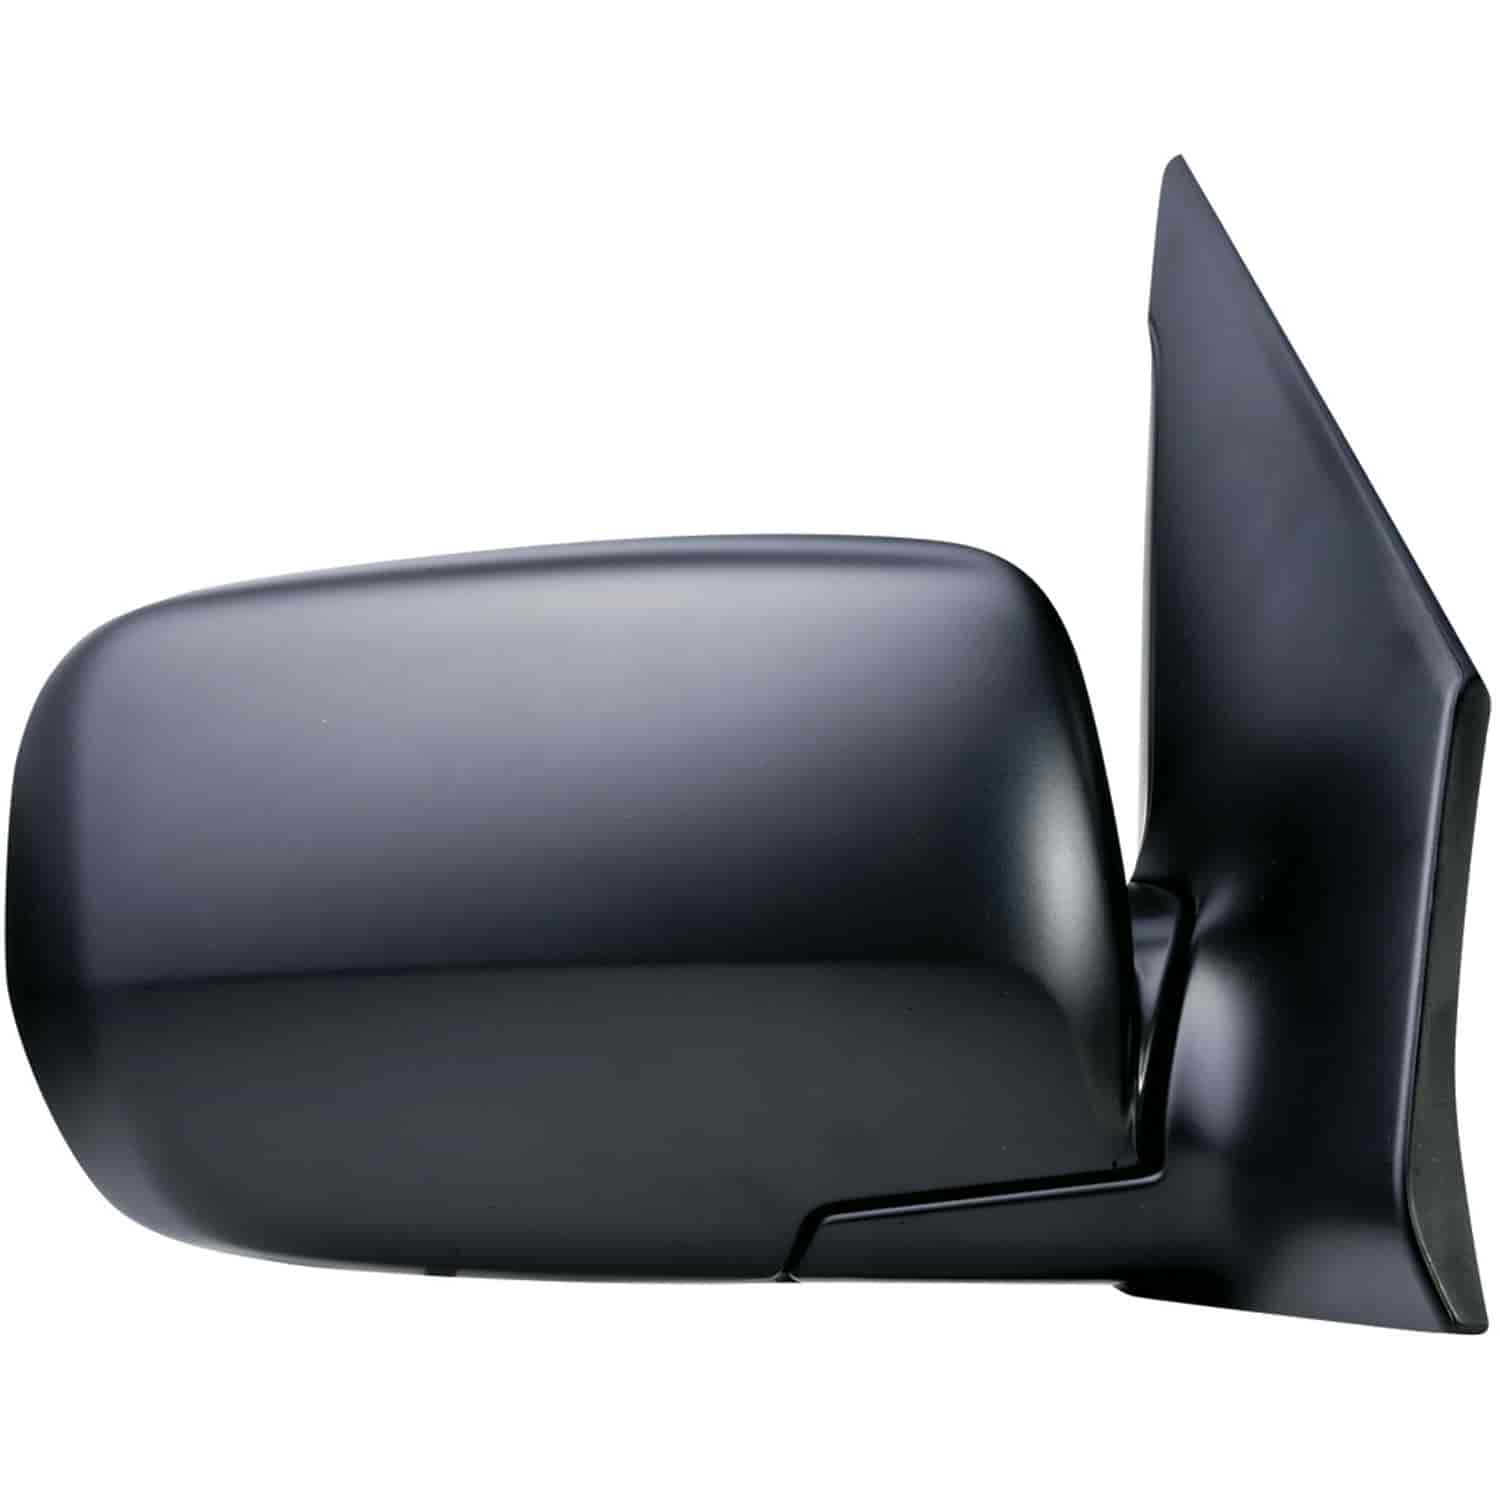 OEM Style Replacement mirror for 03-08 Honda Pilot LX Model passenger side mirror tested to fit and